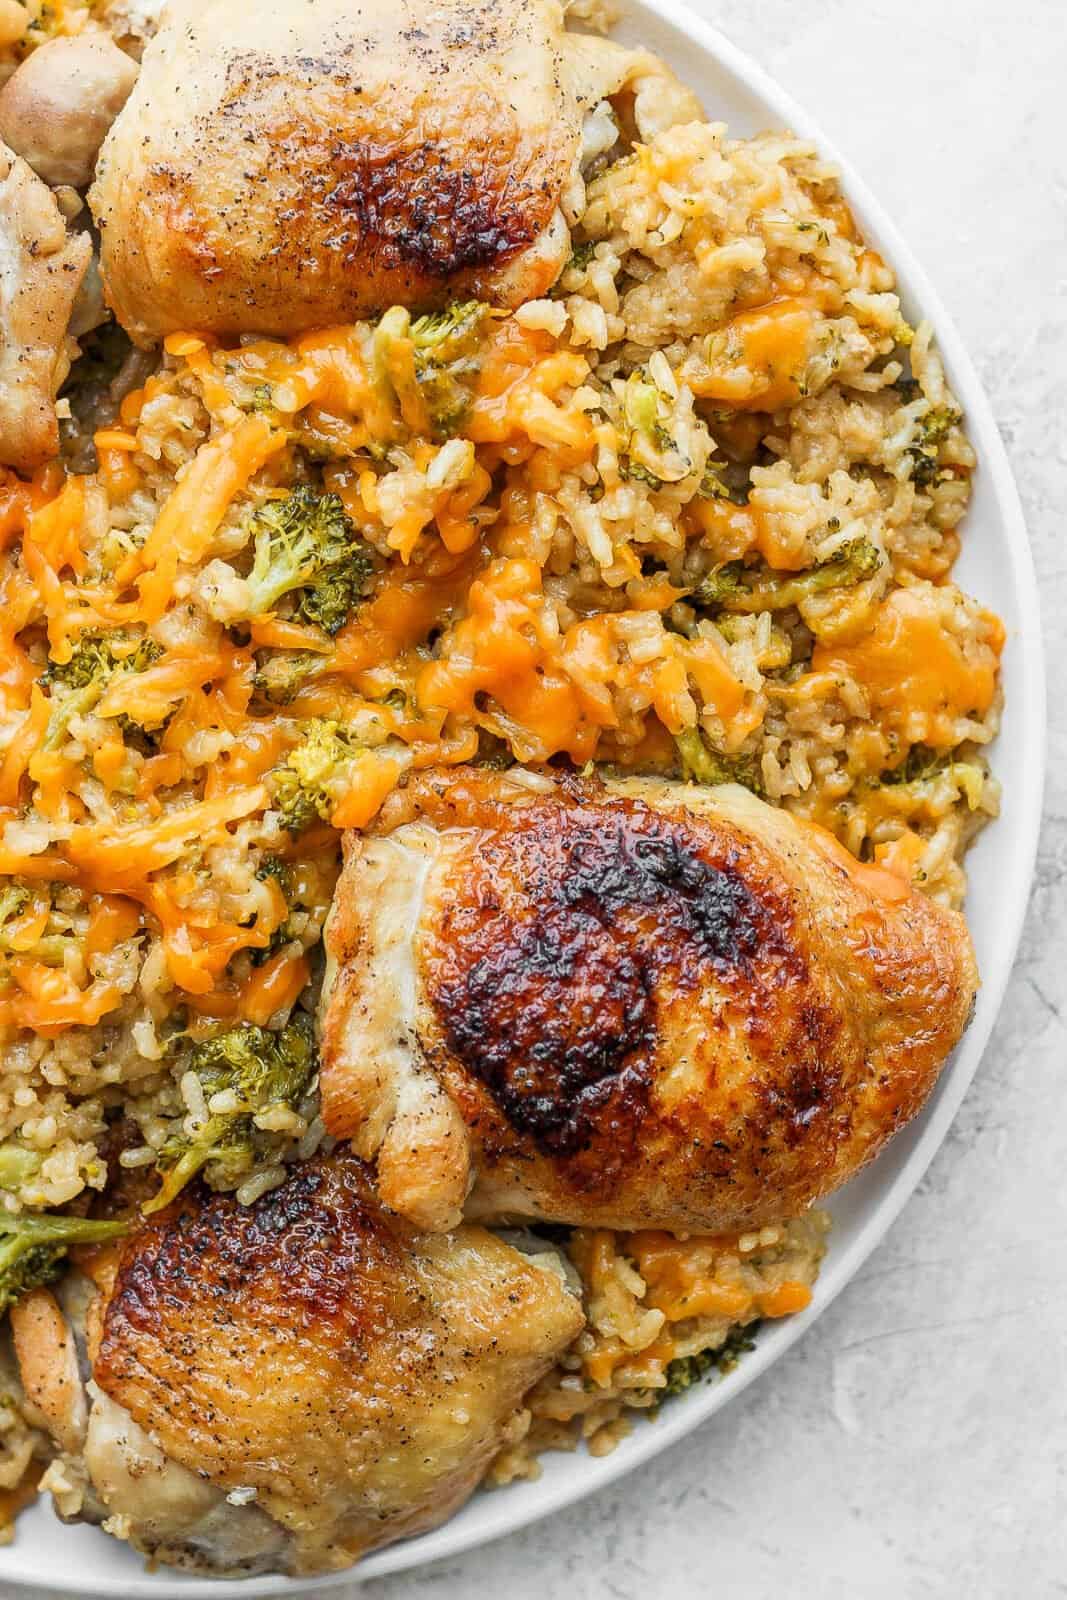 Cheesy chicken broccoli and rice on a plate.